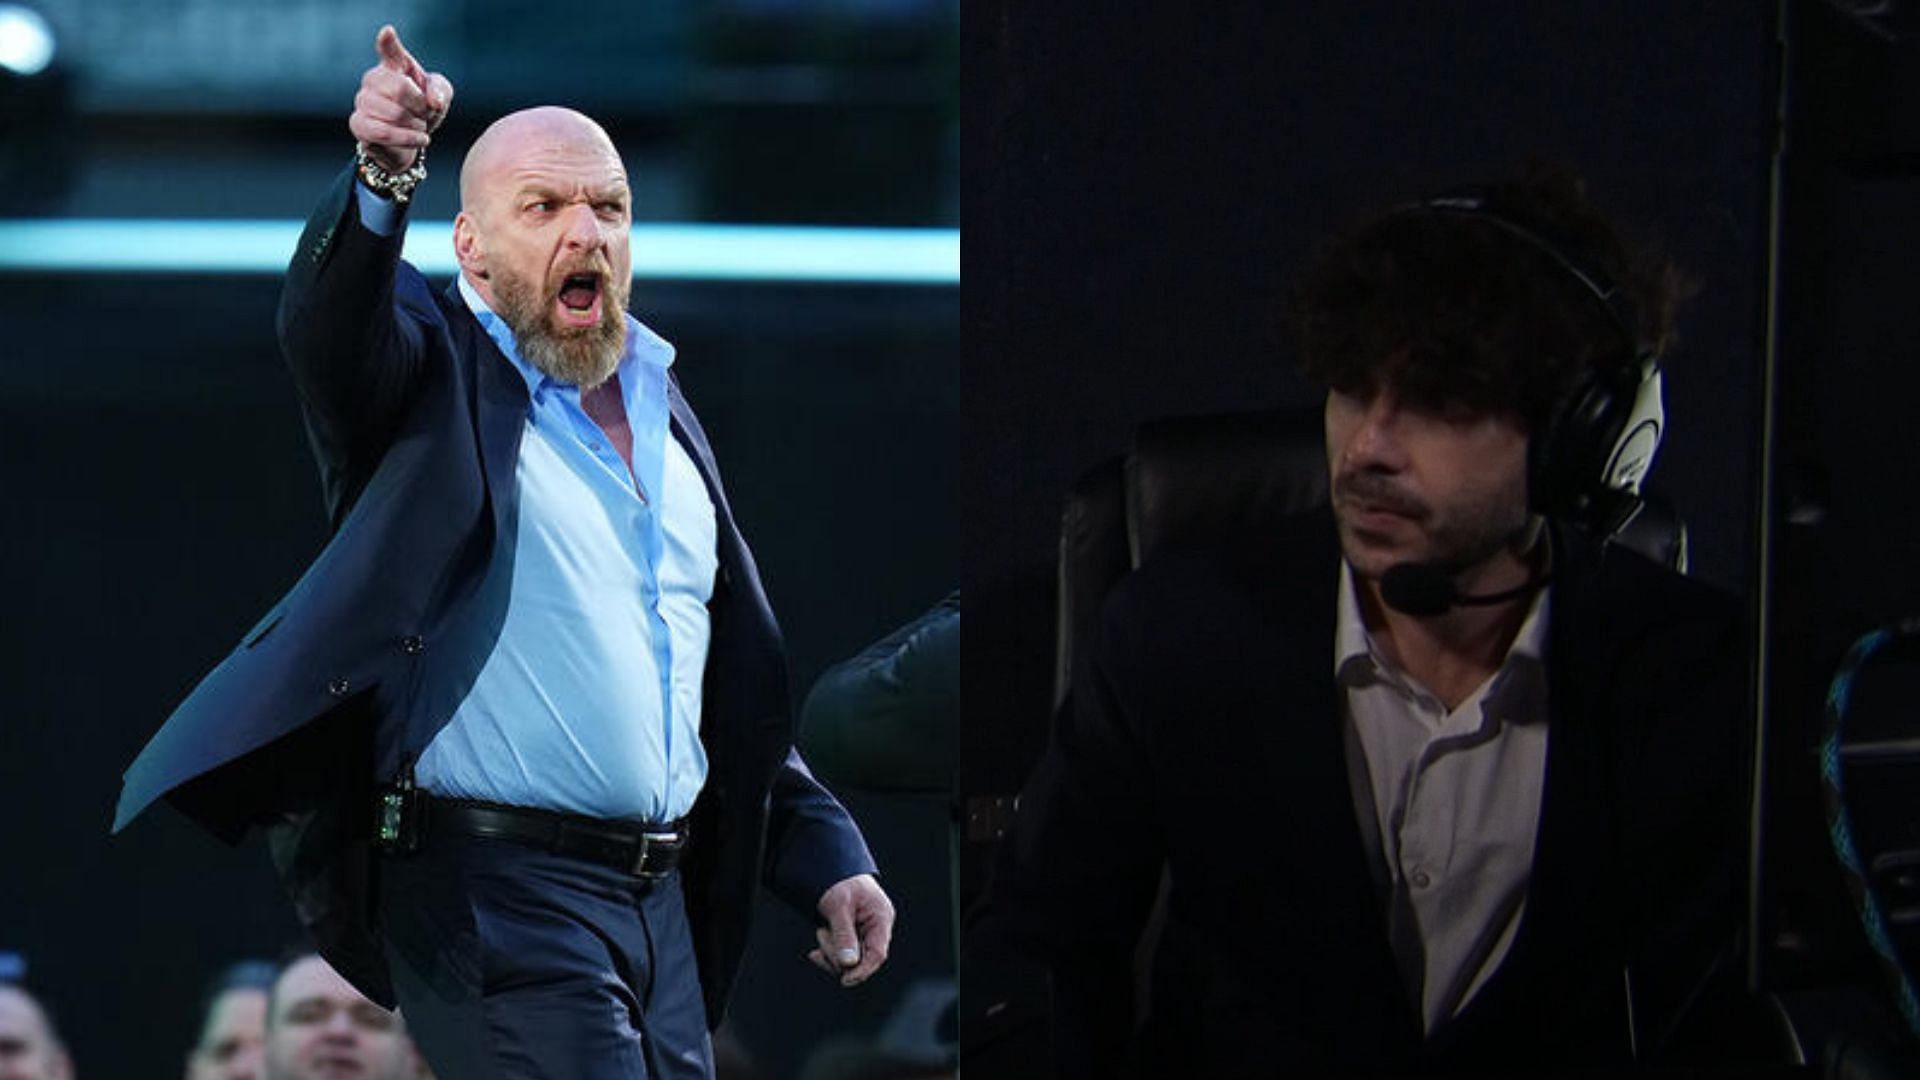 Triple H and Tony Khan are big names in WWE and AEW respectively [Photos courtesy of WWE